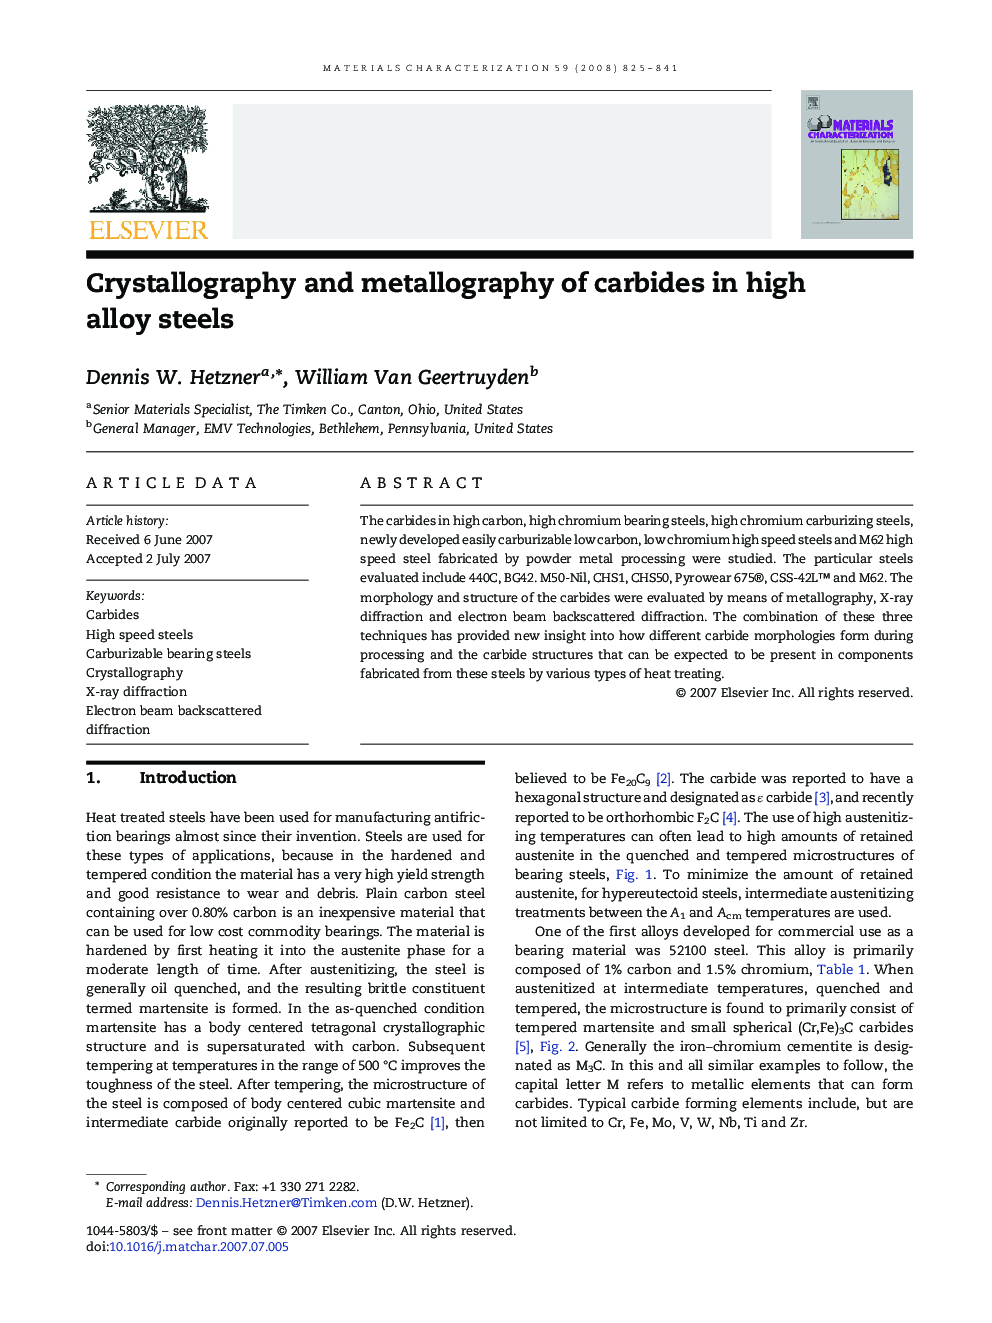 Crystallography and metallography of carbides in high alloy steels